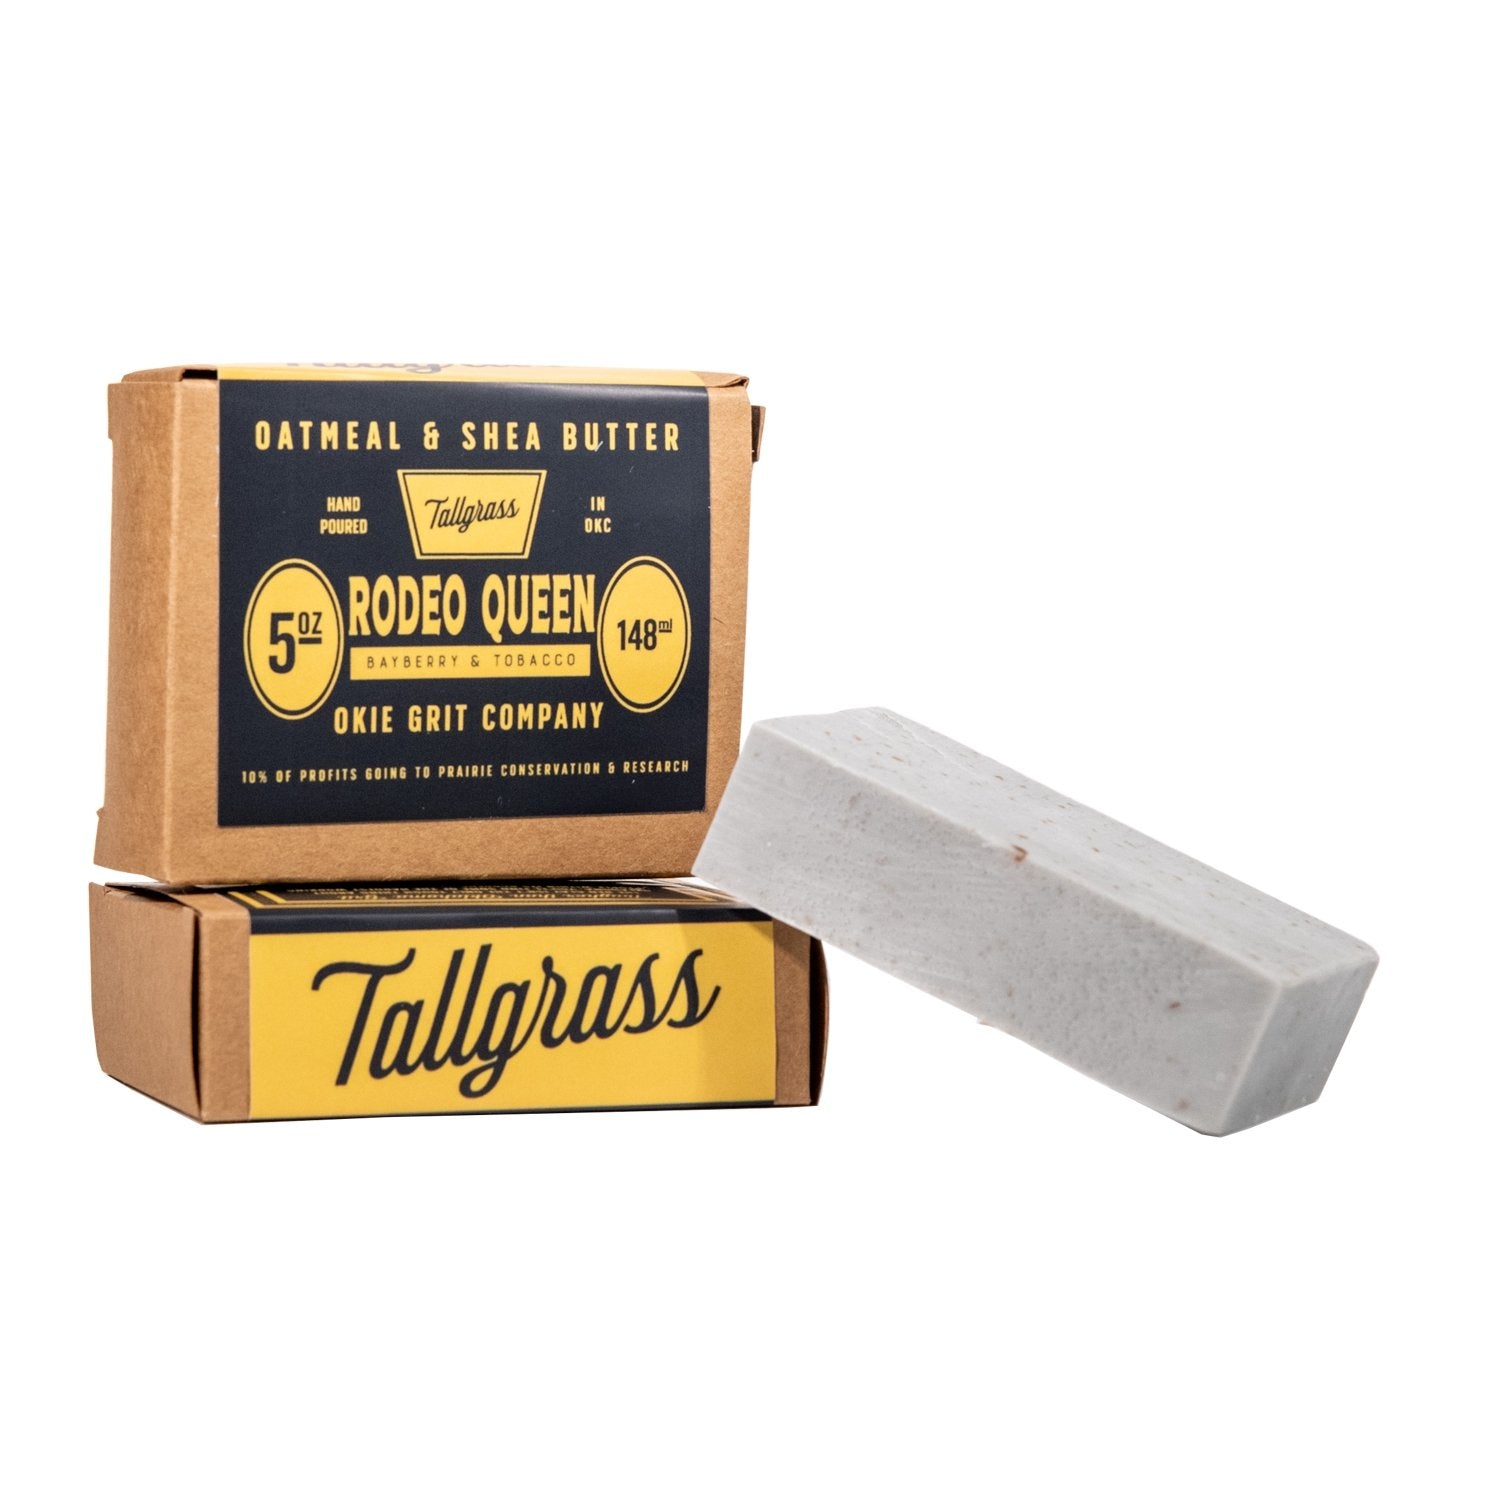 Tallgrass Supply_ Oatmeal &amp; Shae Butter Bar of Soap - Rodeo Queen: Bayberry + Tobacco.